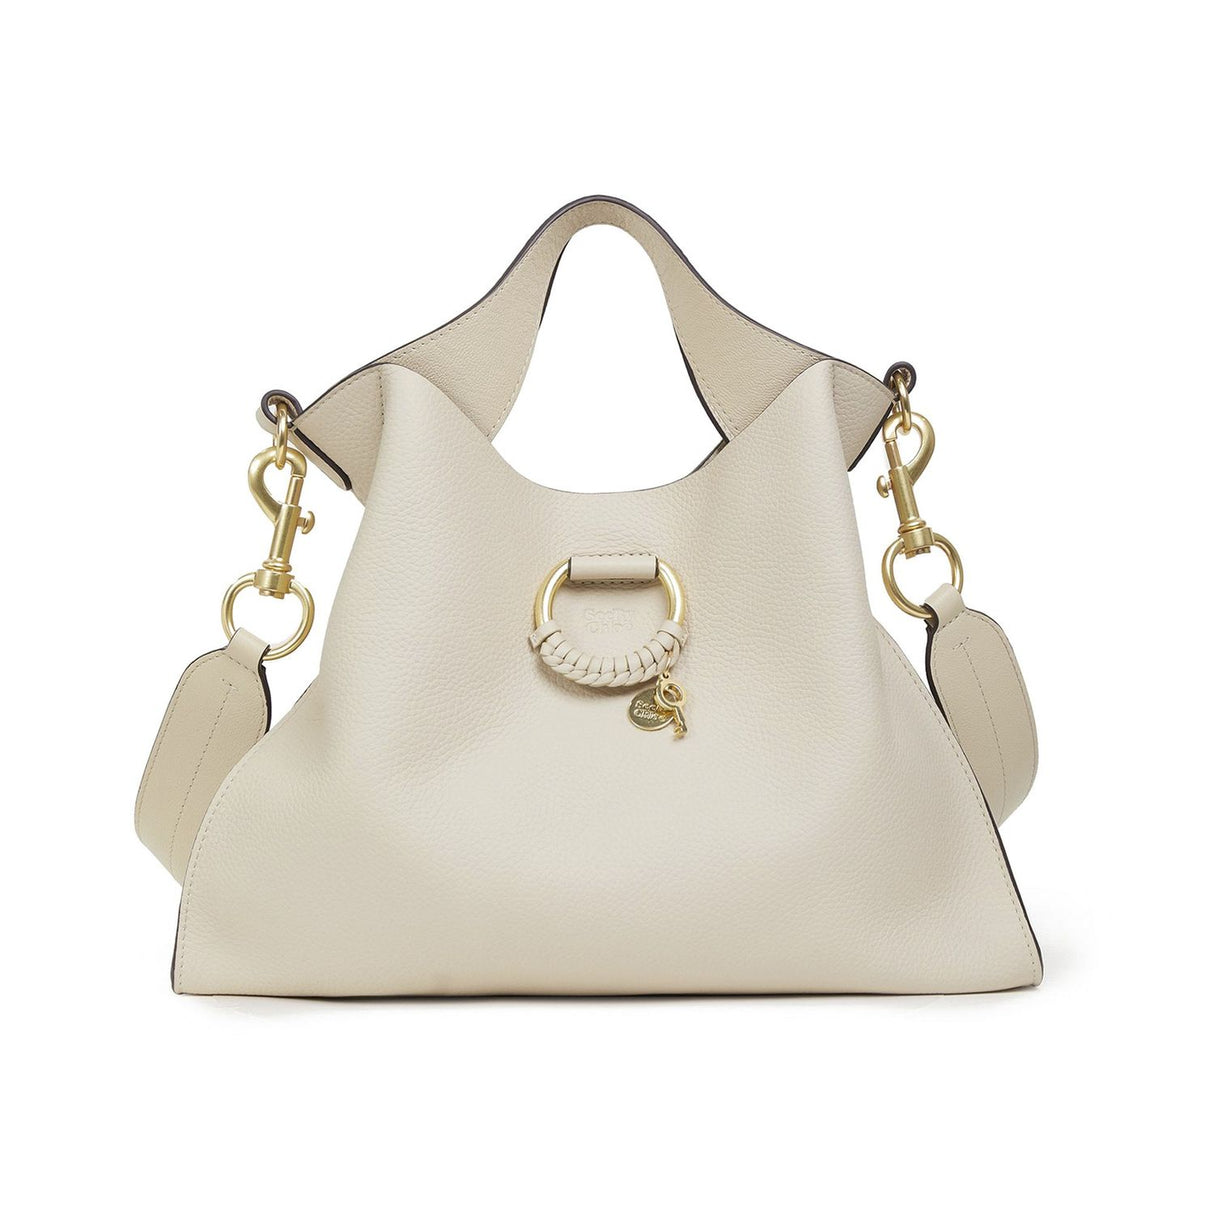 SEE BY CHLOÉ Women's Mini Top Handle Crossbody Bag in Cement Beige Leather, FW23